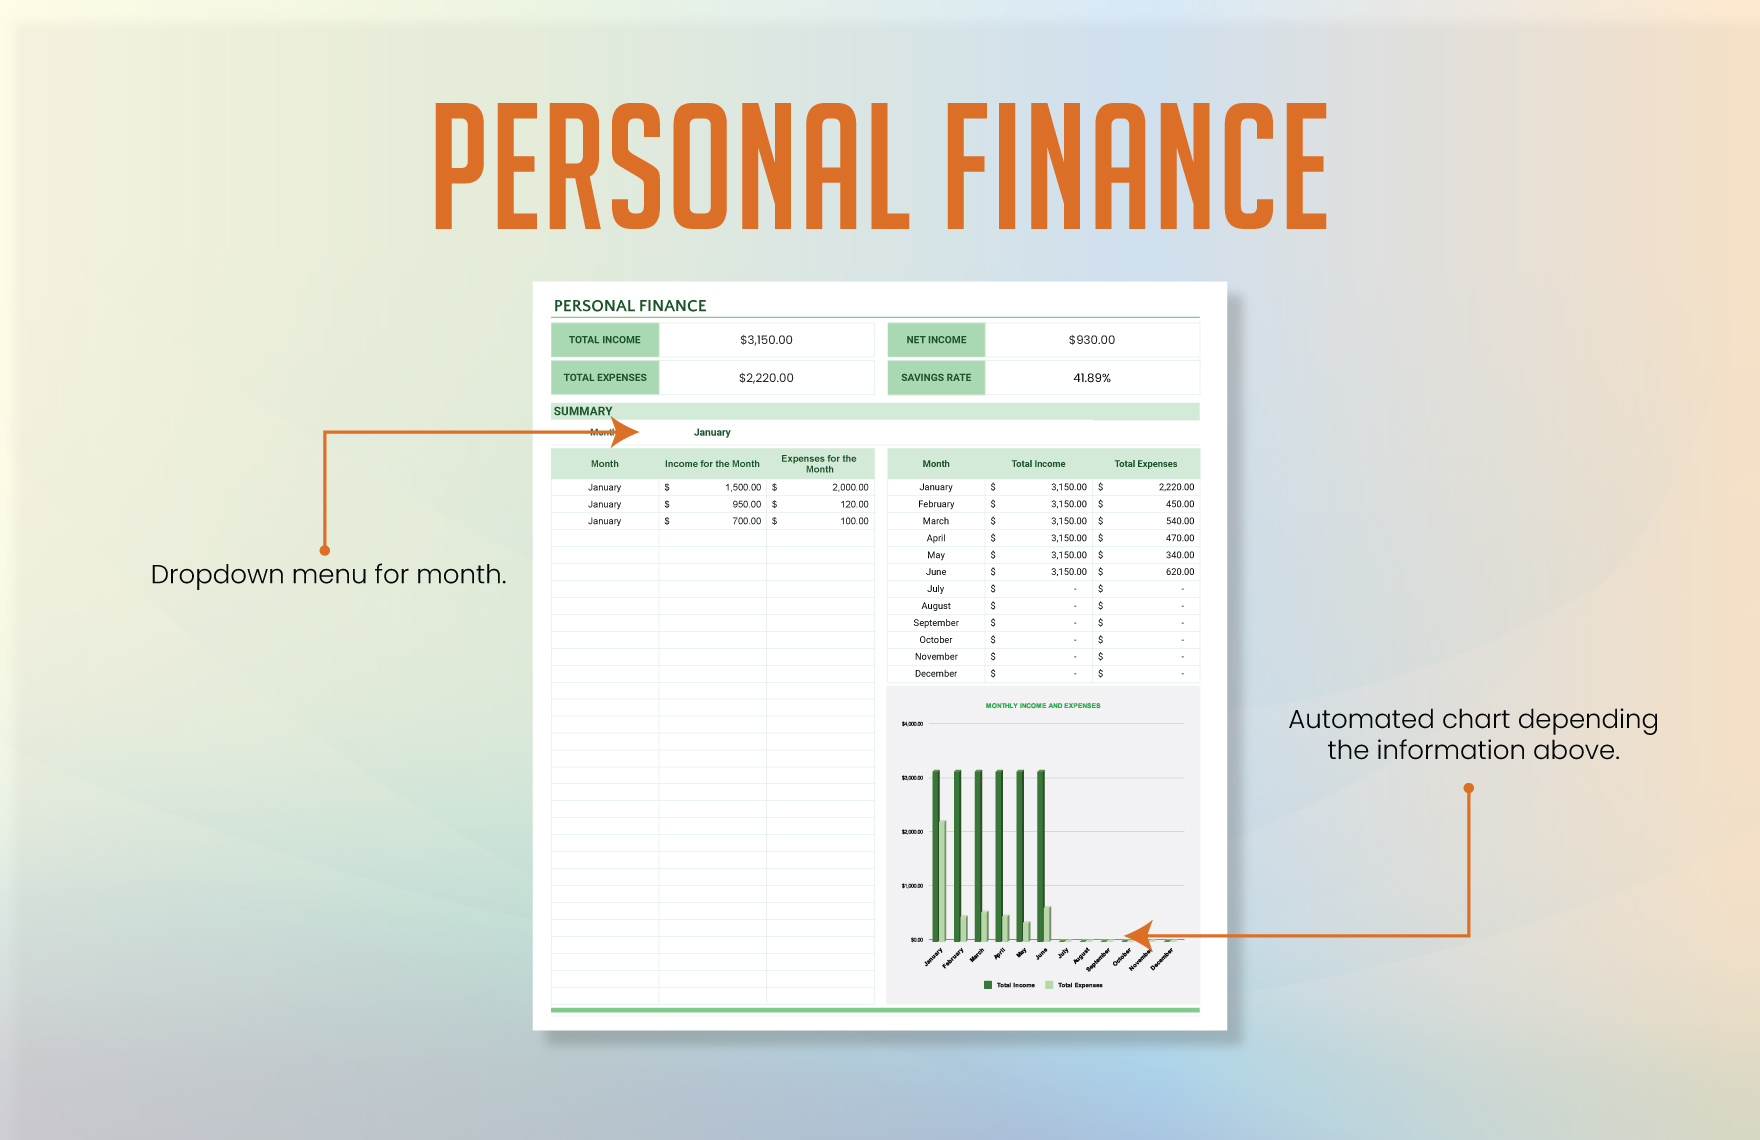 Personal Finance Template